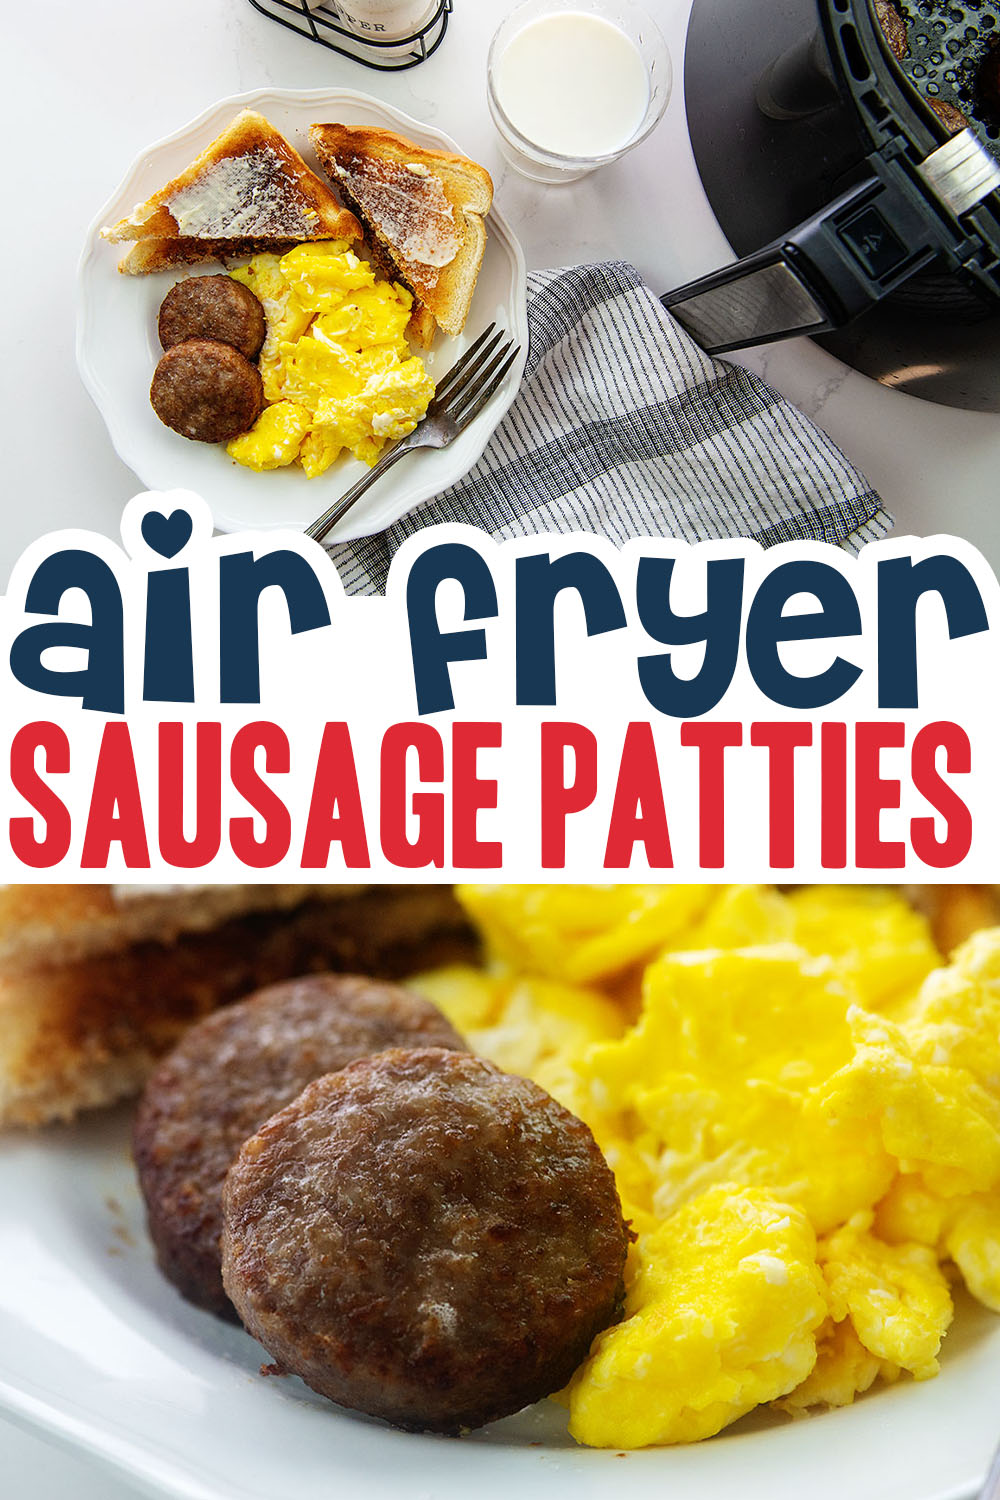 Breakfast sausage has never been easier than when you cook it in the air fryer.  All the goodness of pan-fried without the mess!